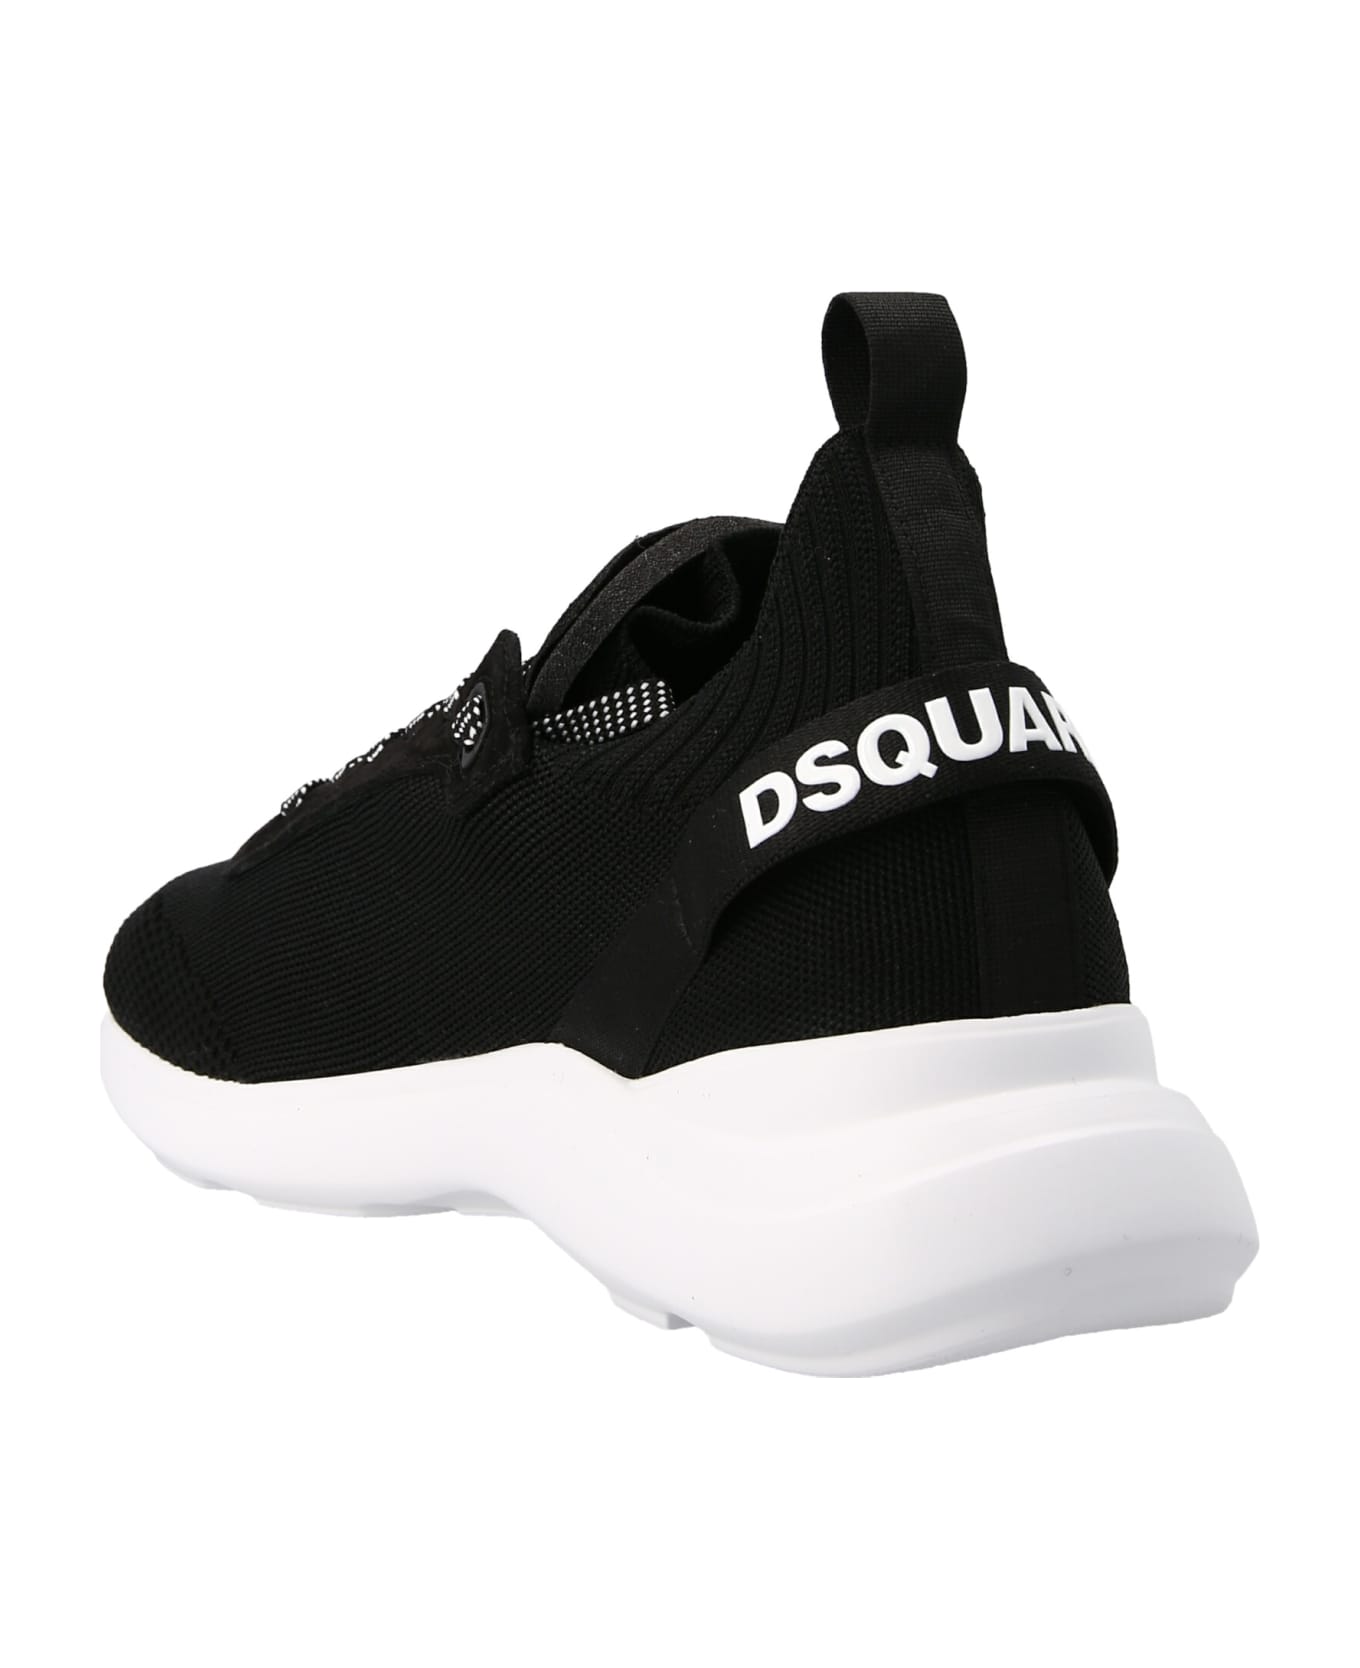 Dsquared2 Logo Printed Lace-up Sneakers - black スニーカー